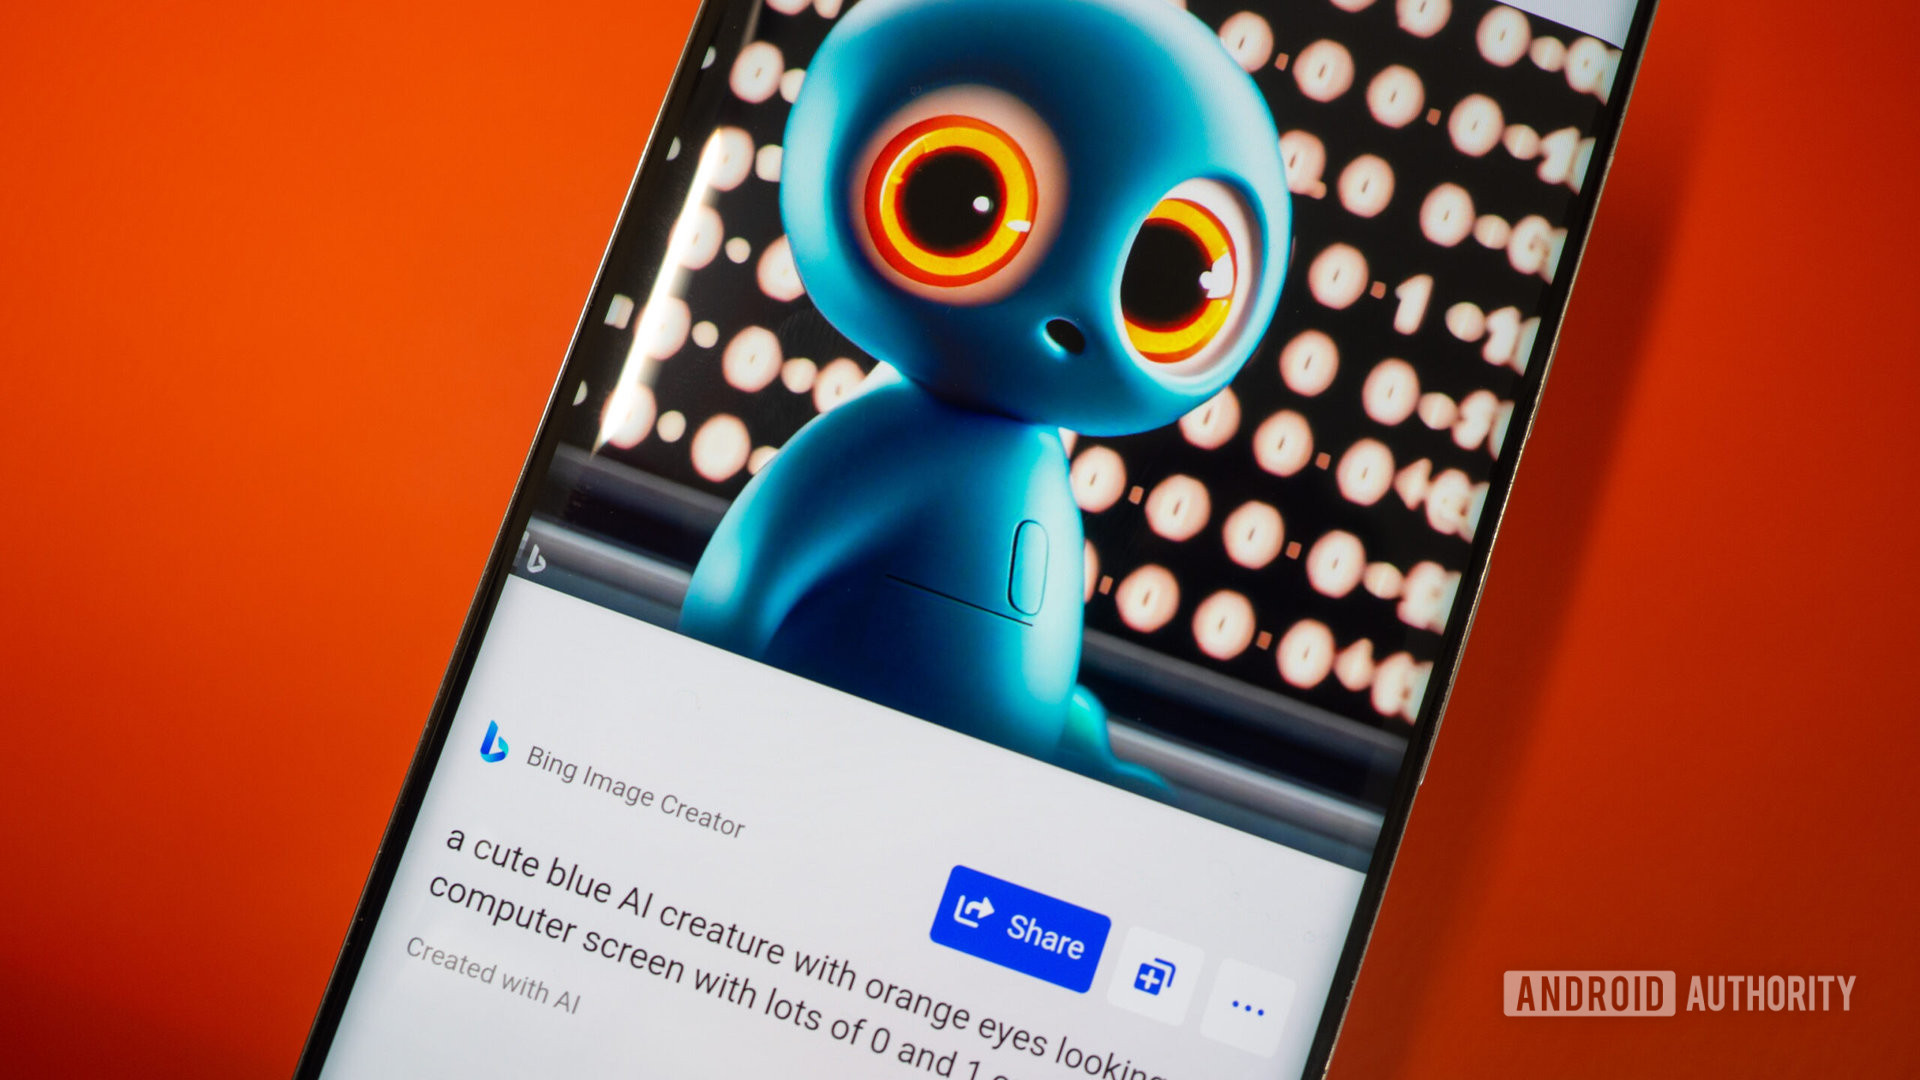 Bing Image Creator on a phone showing a single image of a blue AI creature with orange eyes in front of a screen of zeros and ones